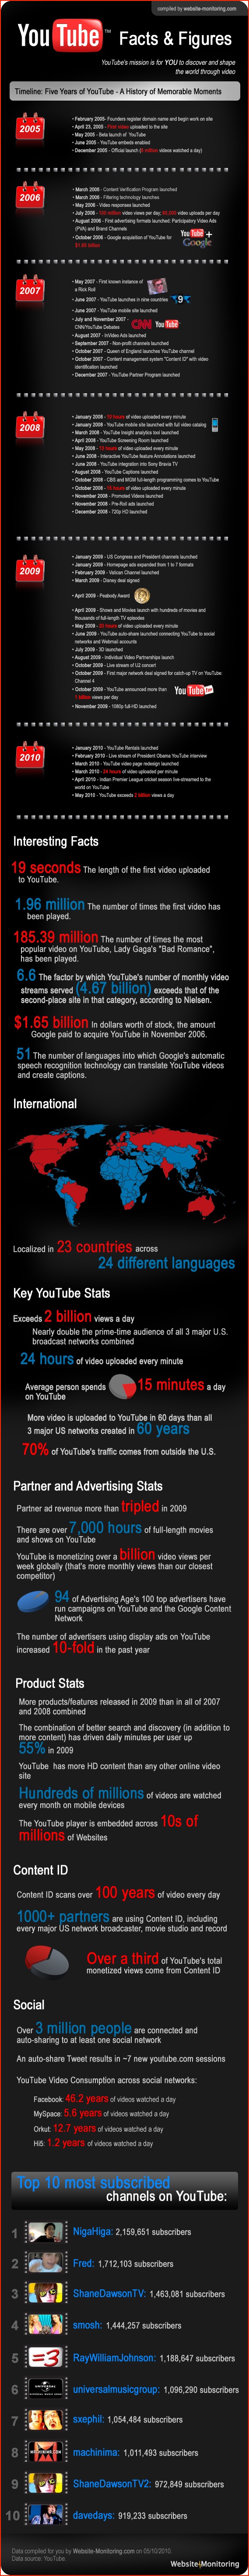 YouTube Facts